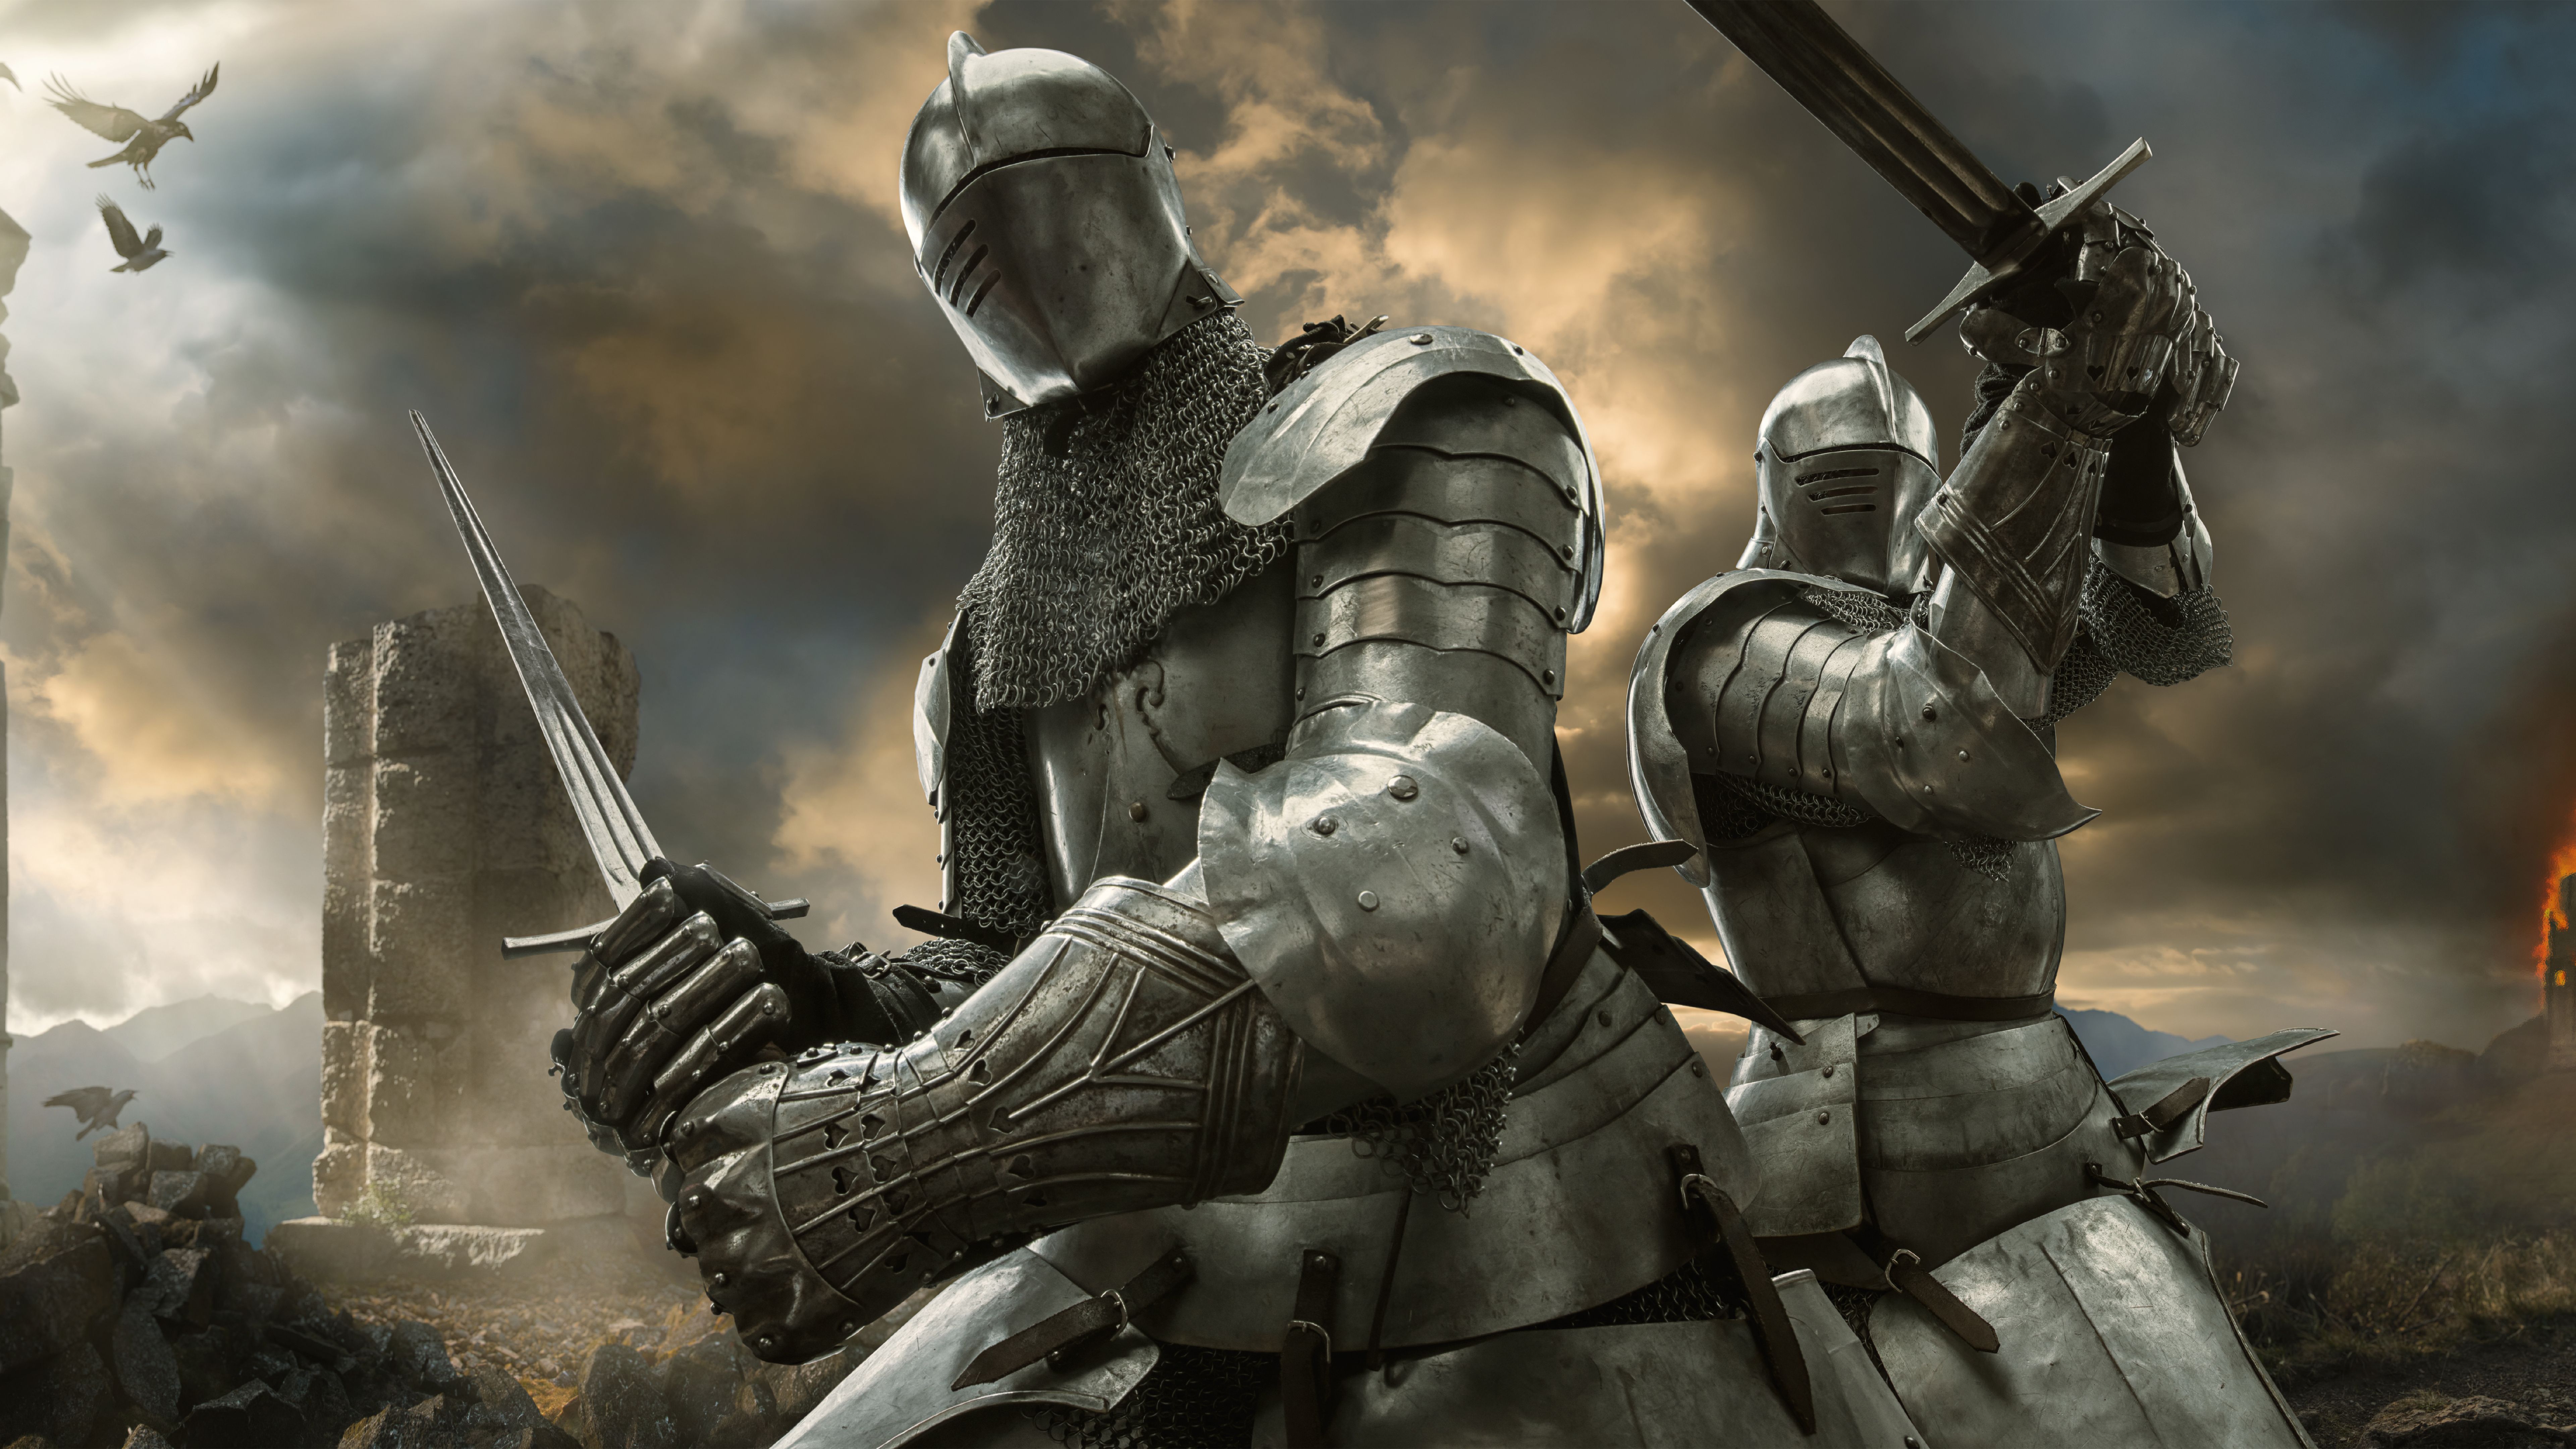 The Knights Templar 10k 8k HD 4k Wallpaper, Image, Background, Photo and Picture